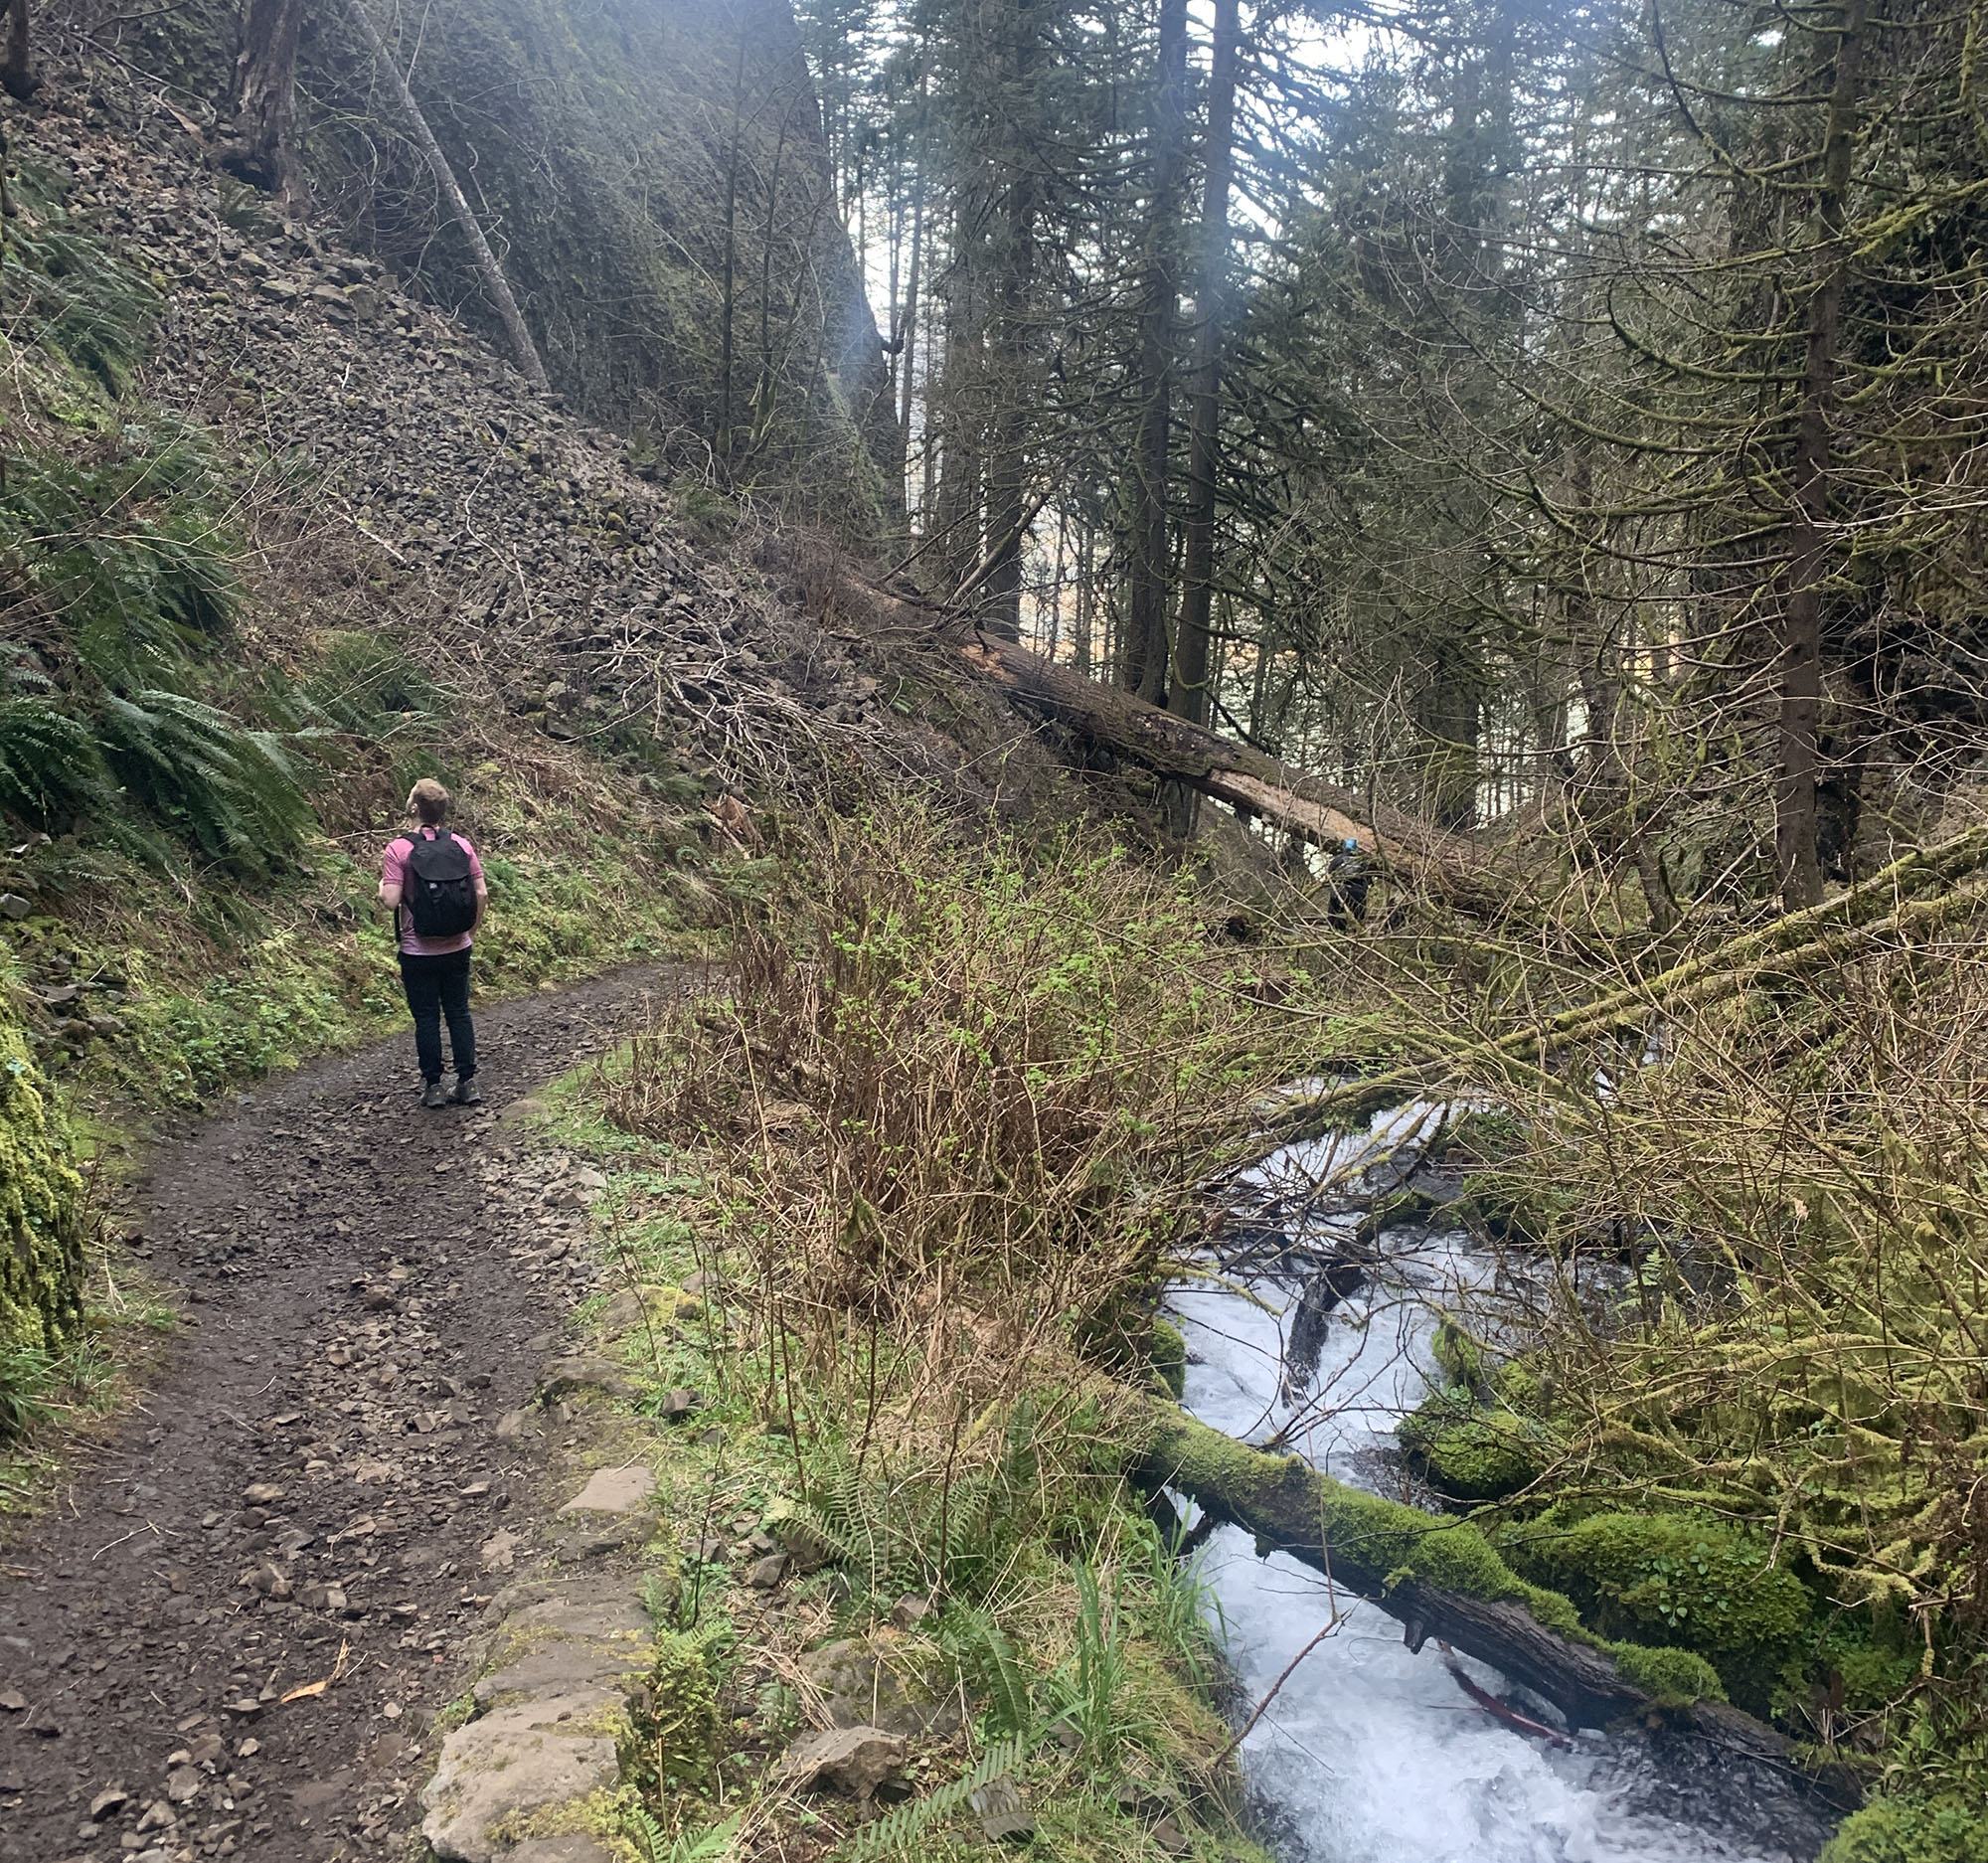 Wahkeena Trail, unkown solo hiker, March 20th, 2020